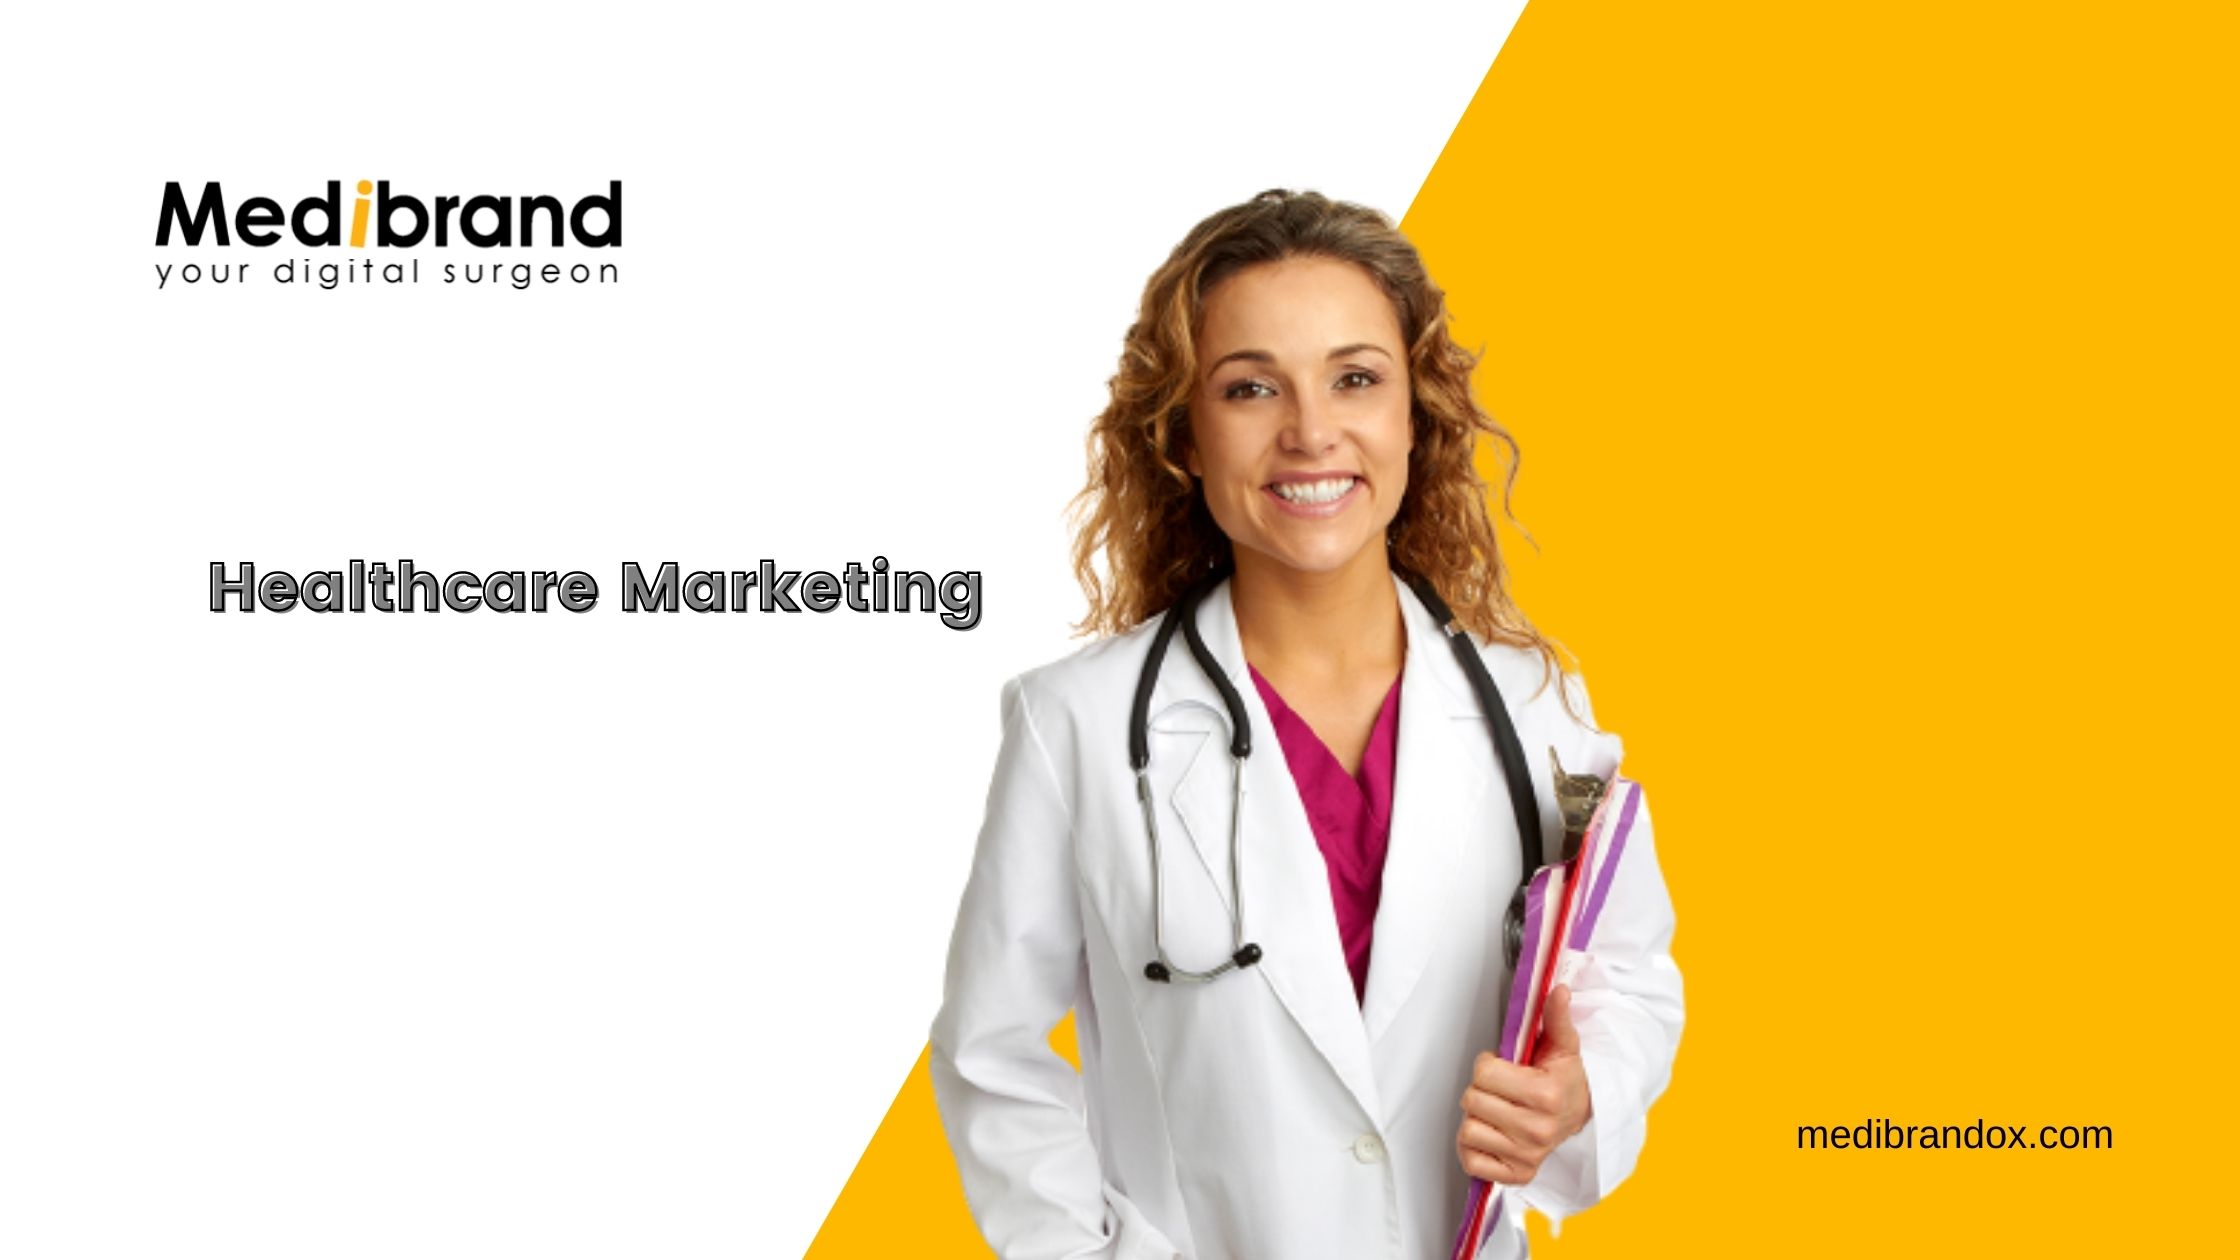 Article about Healthcare Marketing Company Helps Medical Service Suppliers